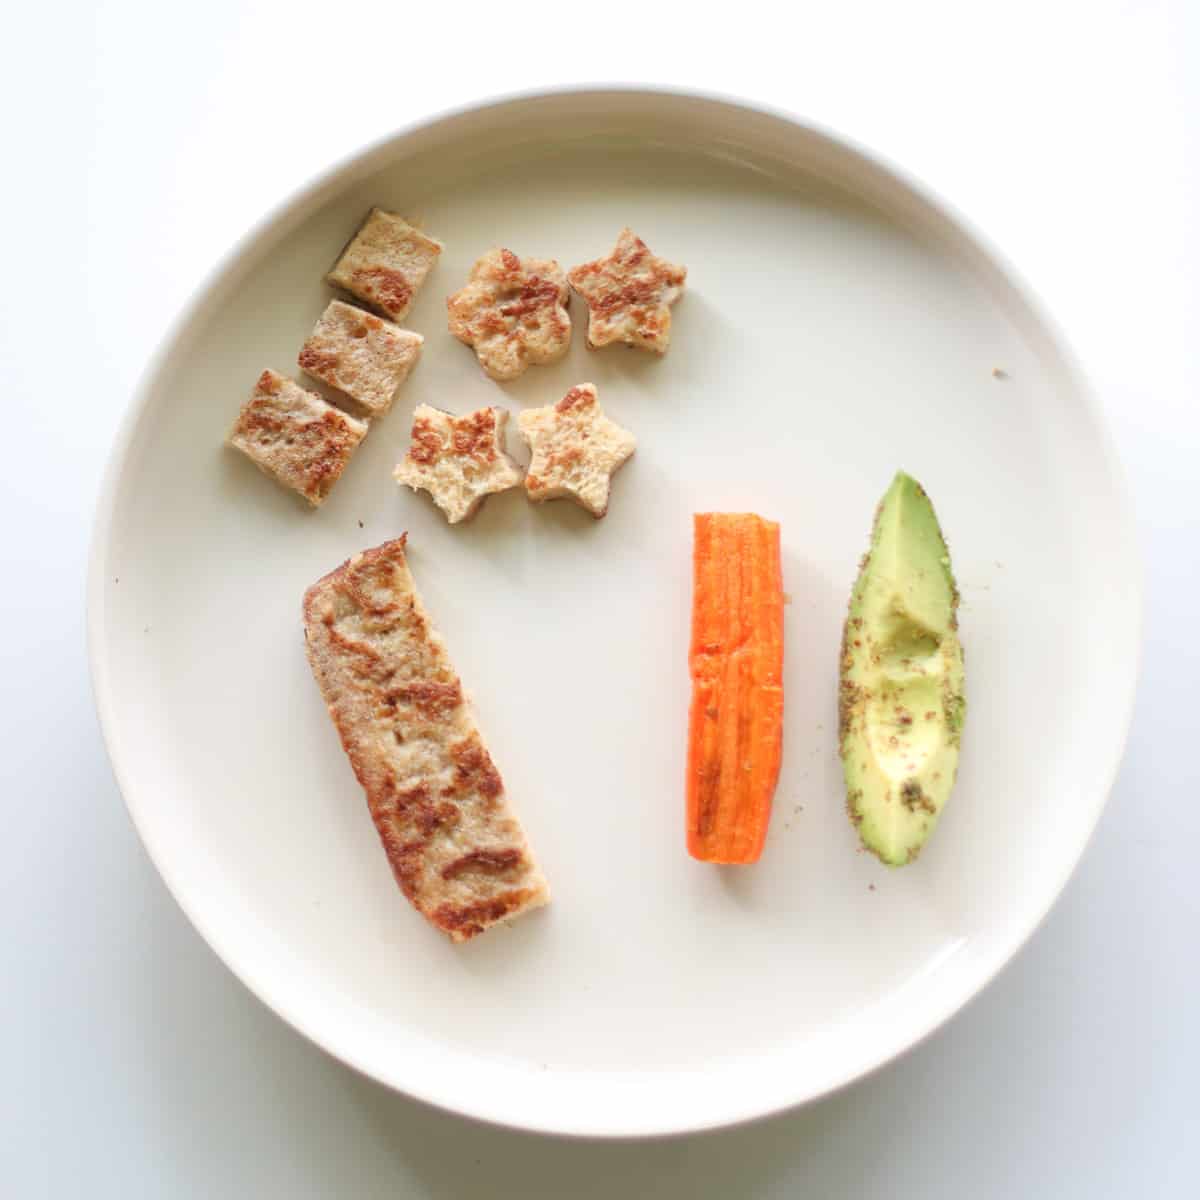 Banana French toast in strip and small pieces along with carrot and avocado.